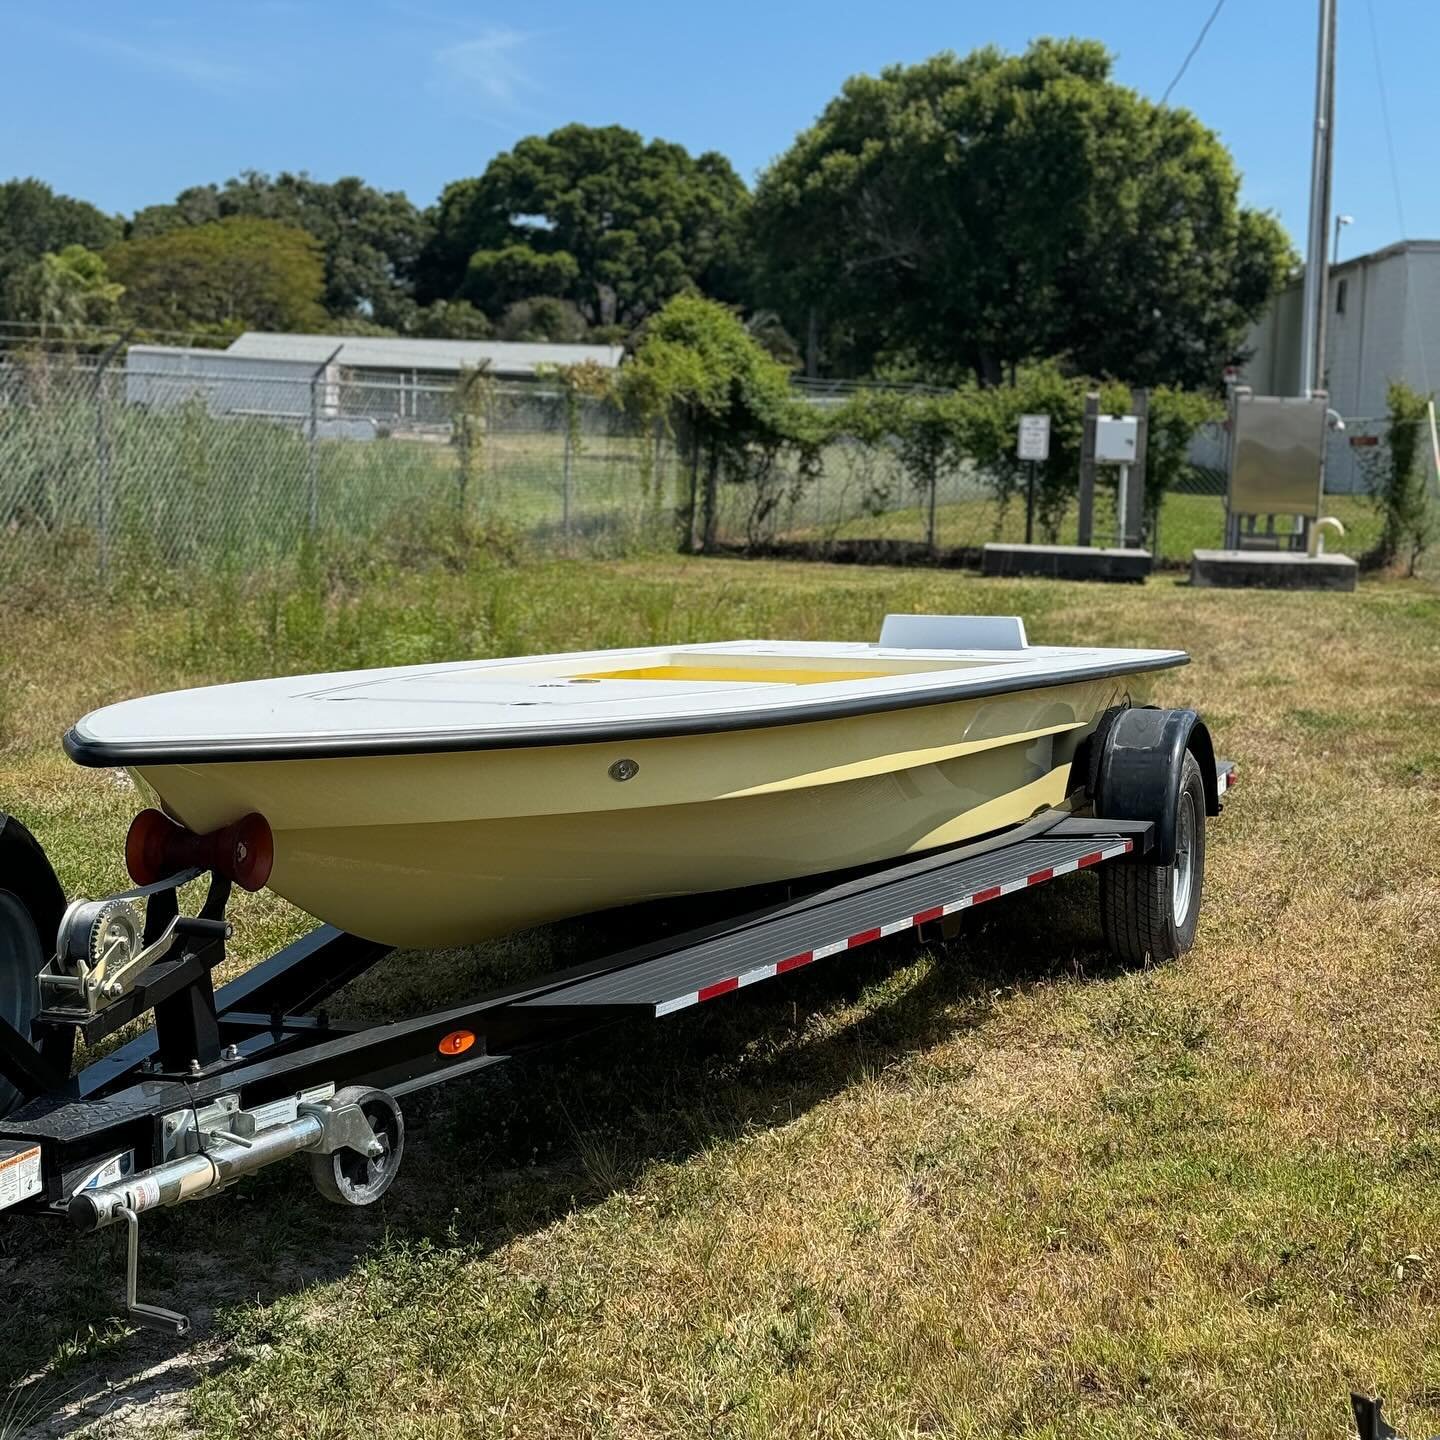 ‼️2024 Fighting Lady Yellow 173 for sale‼️

~ $31,000 with a 30hp Tohatsu &amp; poling platform 
~ $35,000 with a 50hp Tohatsu &amp; poling platform 

Ready for delivery within one week after choice of power! Please reach out to Jacob for more inform